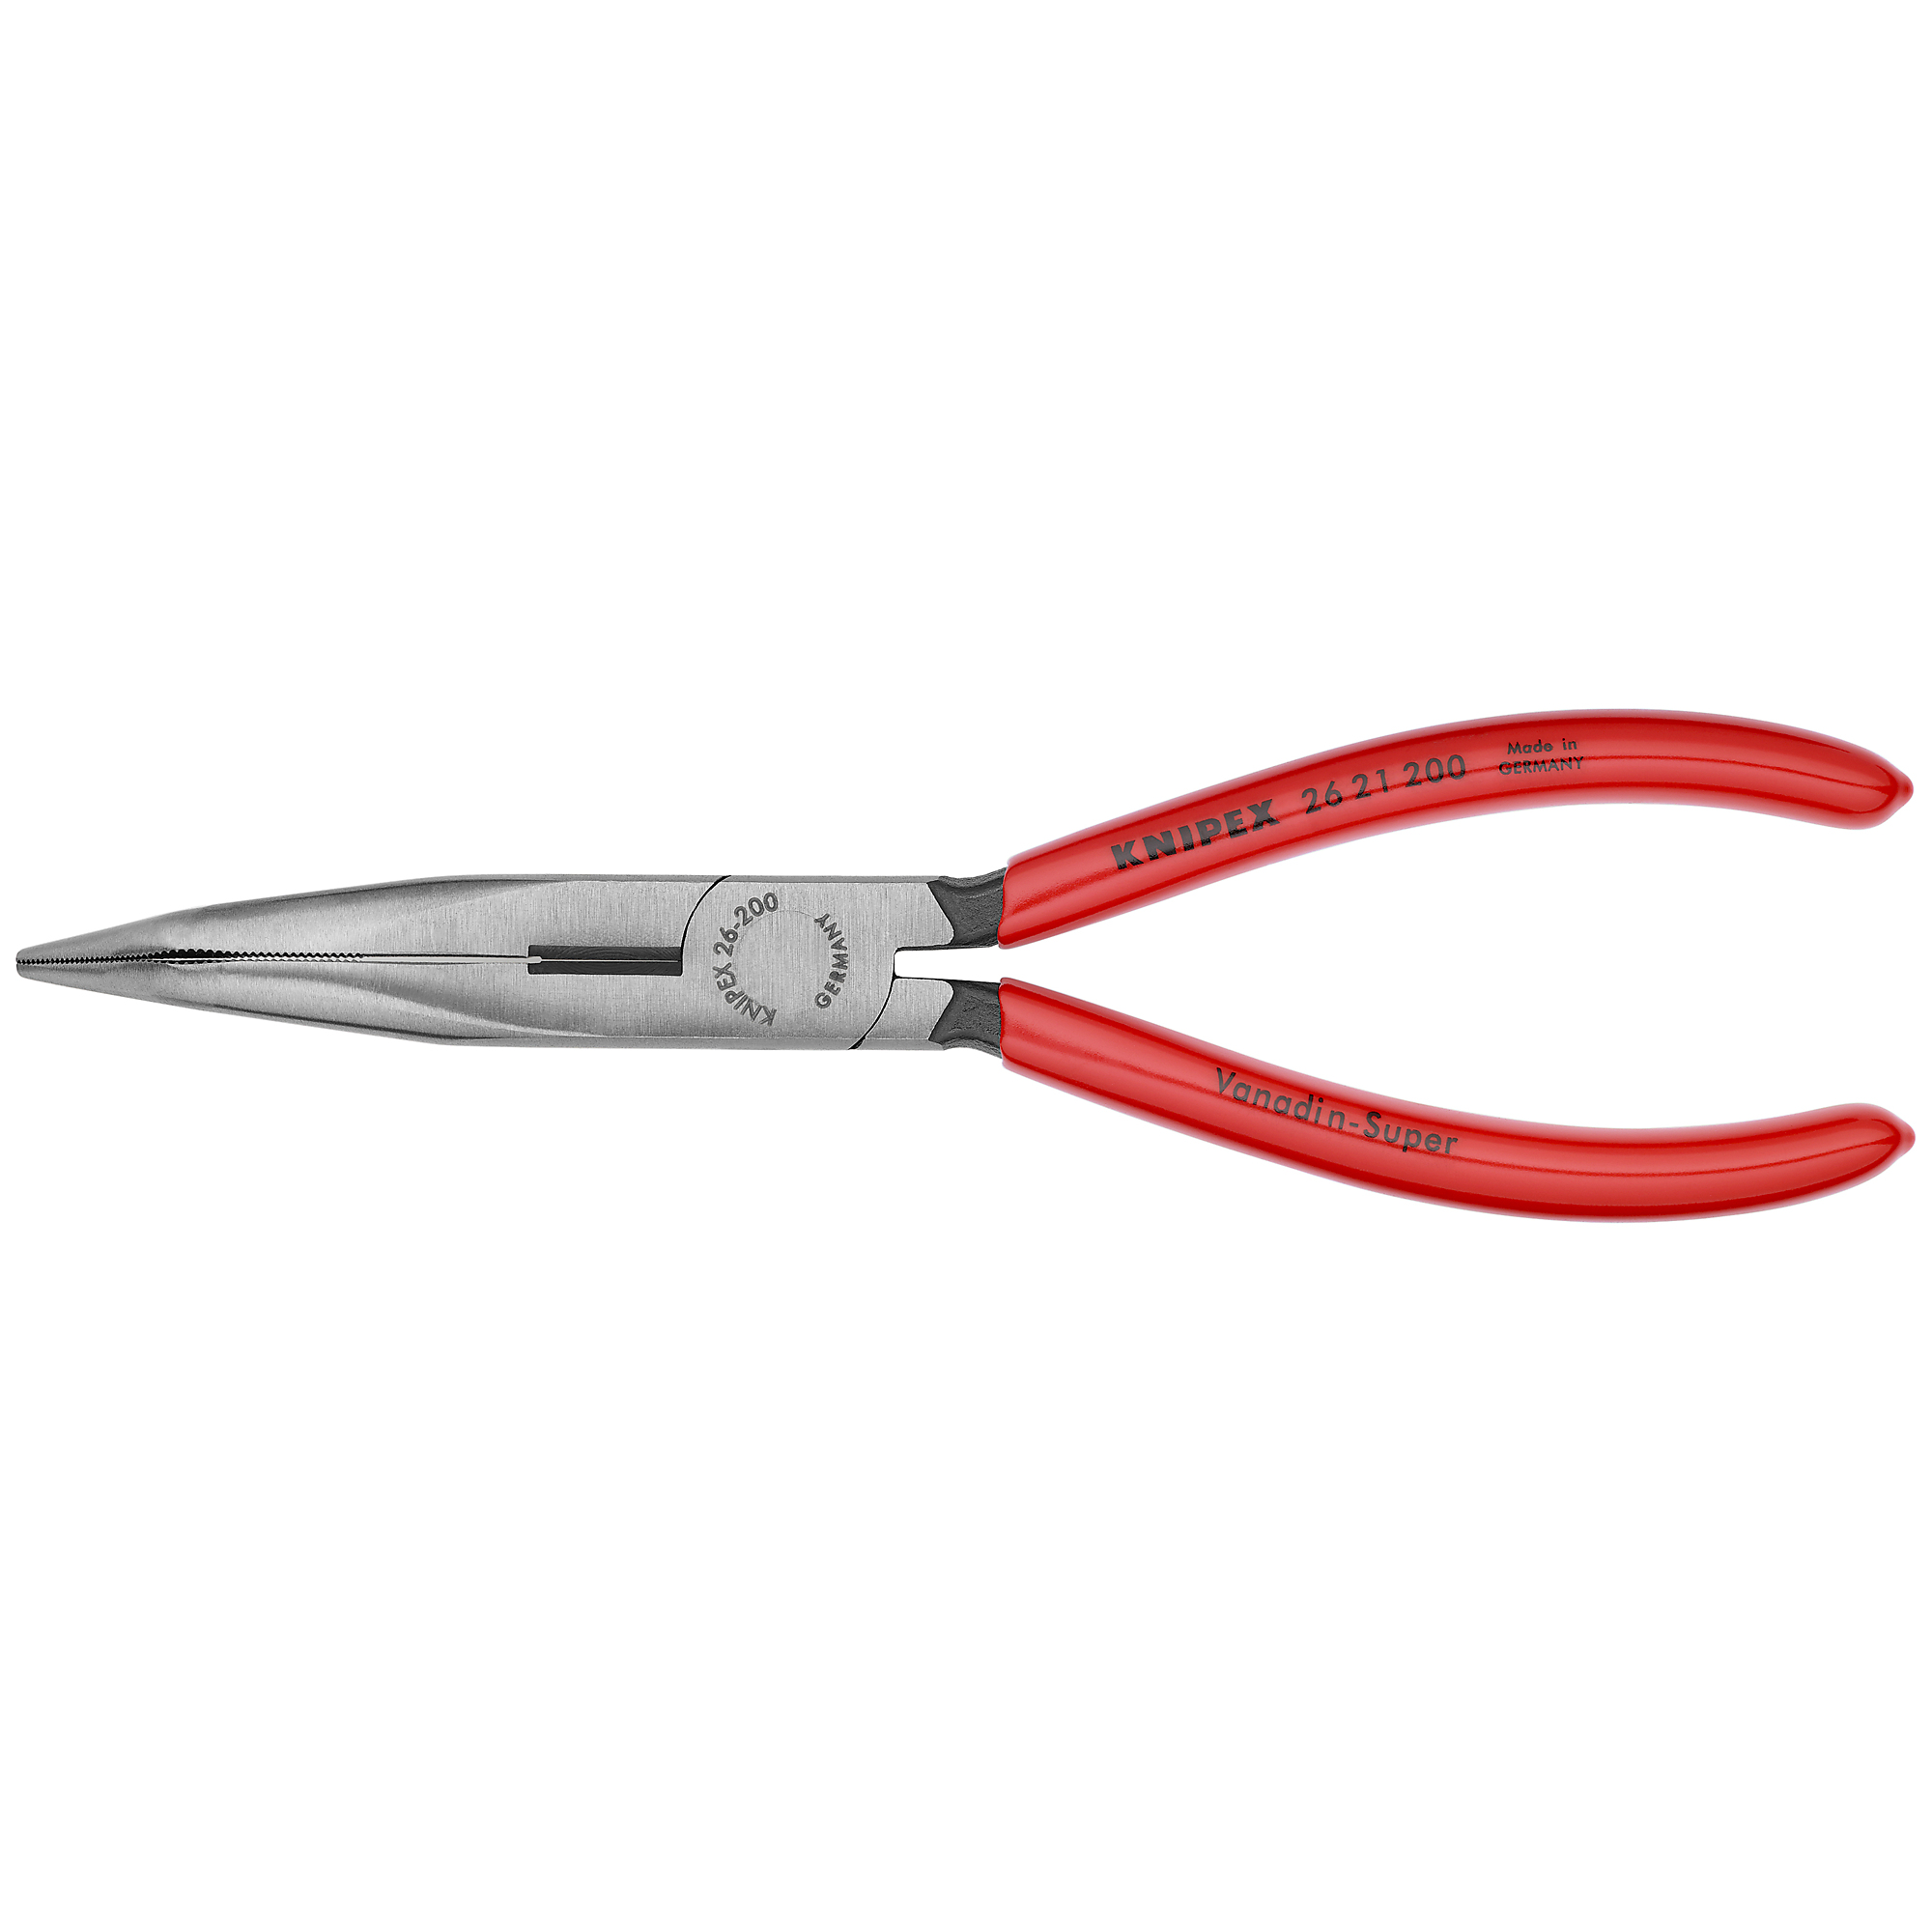 KNIPEX, Long Nose 40Â° Angled Pliers w/Cutter, Bulk, 8Inch, Pieces (qty.) 1 Material Steel, Jaw Capacity 0.125 in, Model 26 21 200